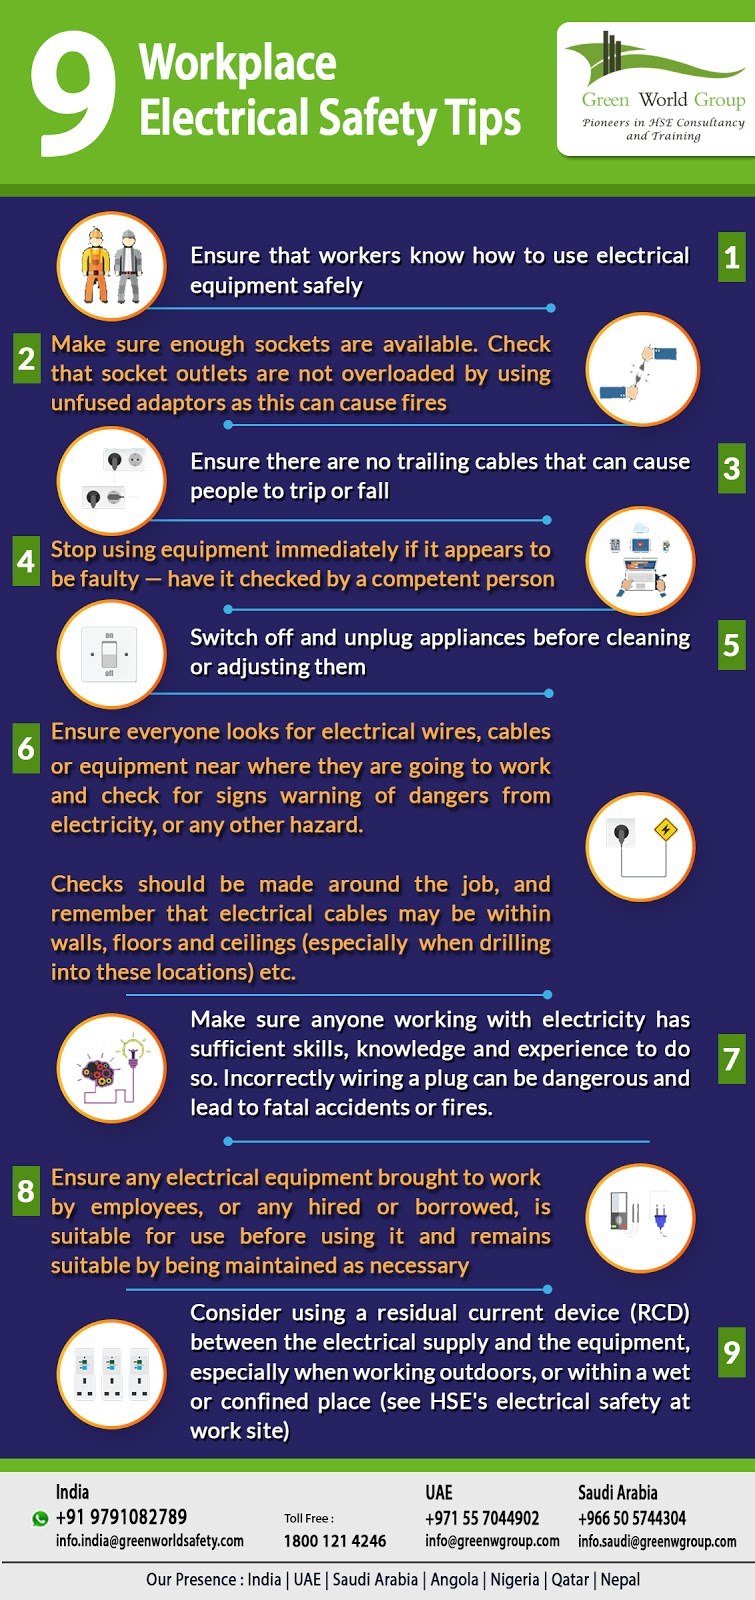 9 Workplace Electrical Safety Tips - GWG